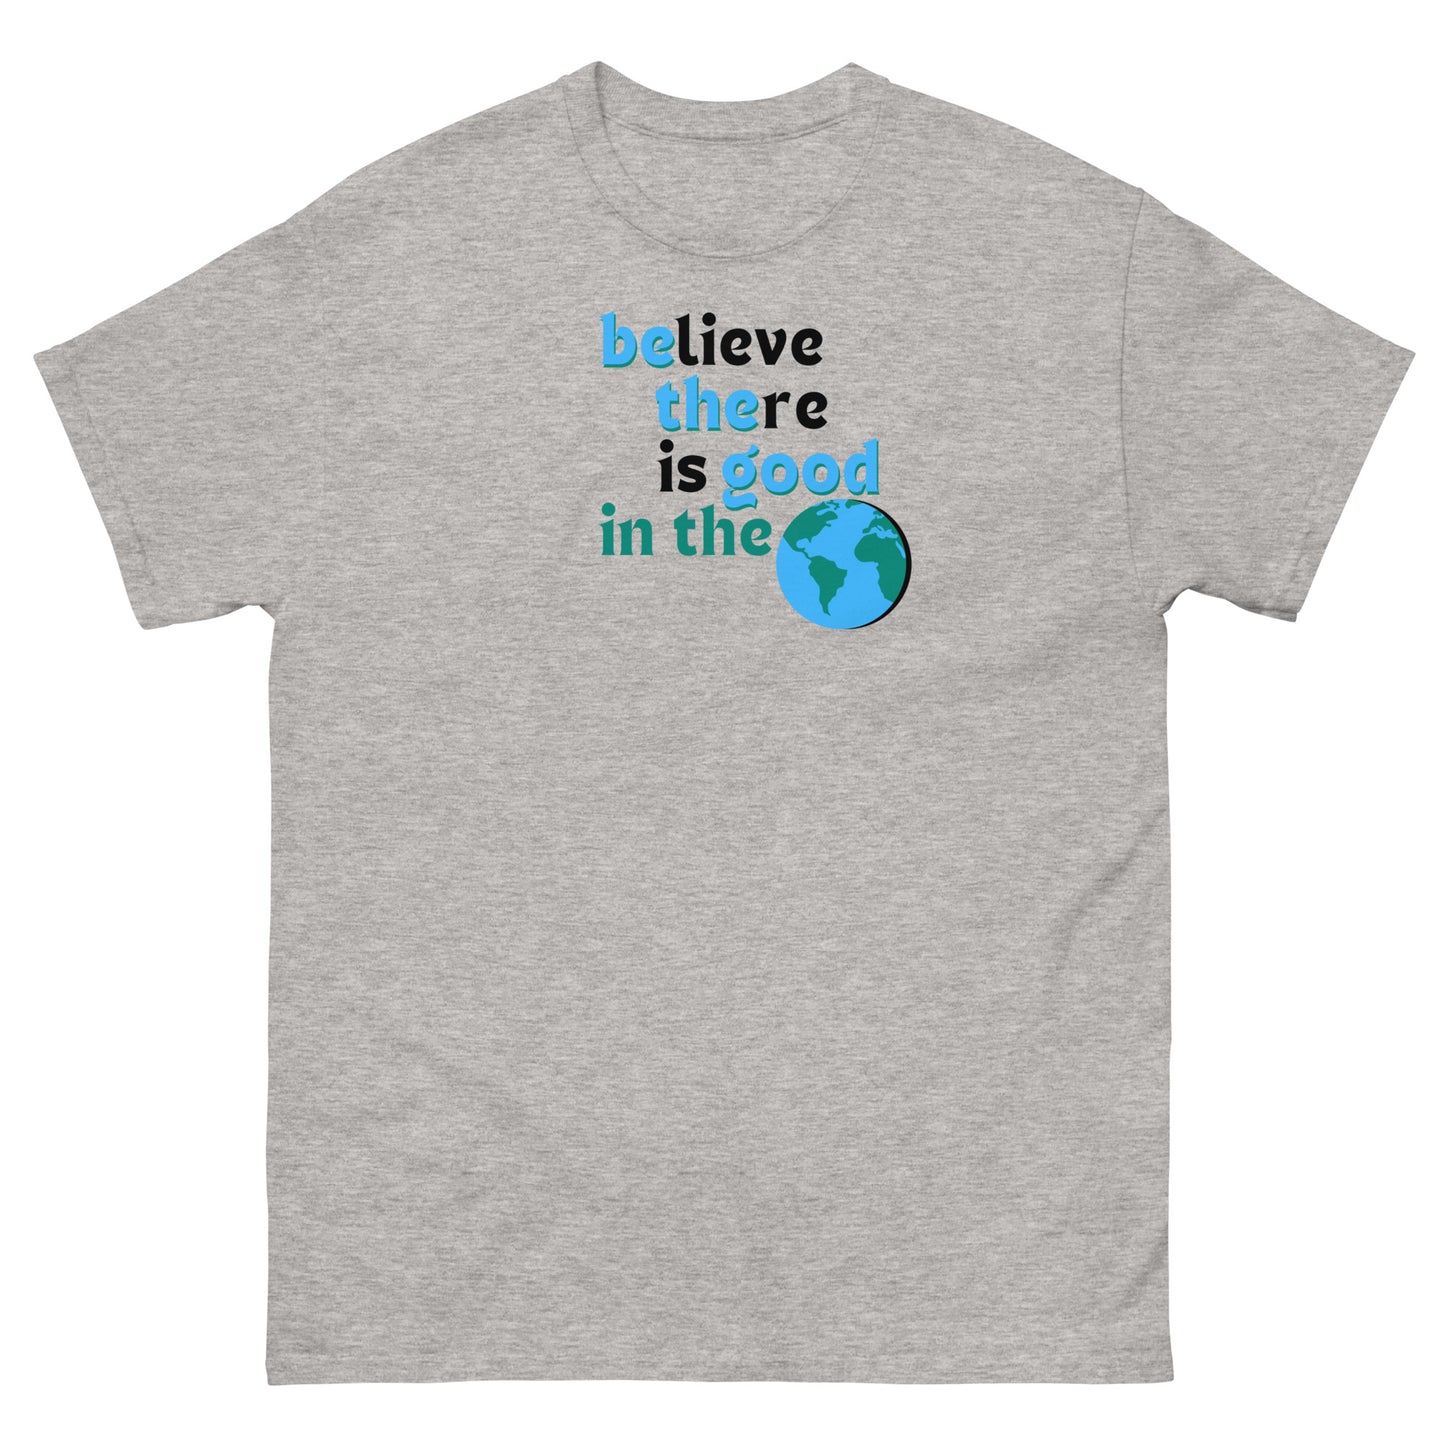 Men's Classic Tee - Believe There is Good in the World